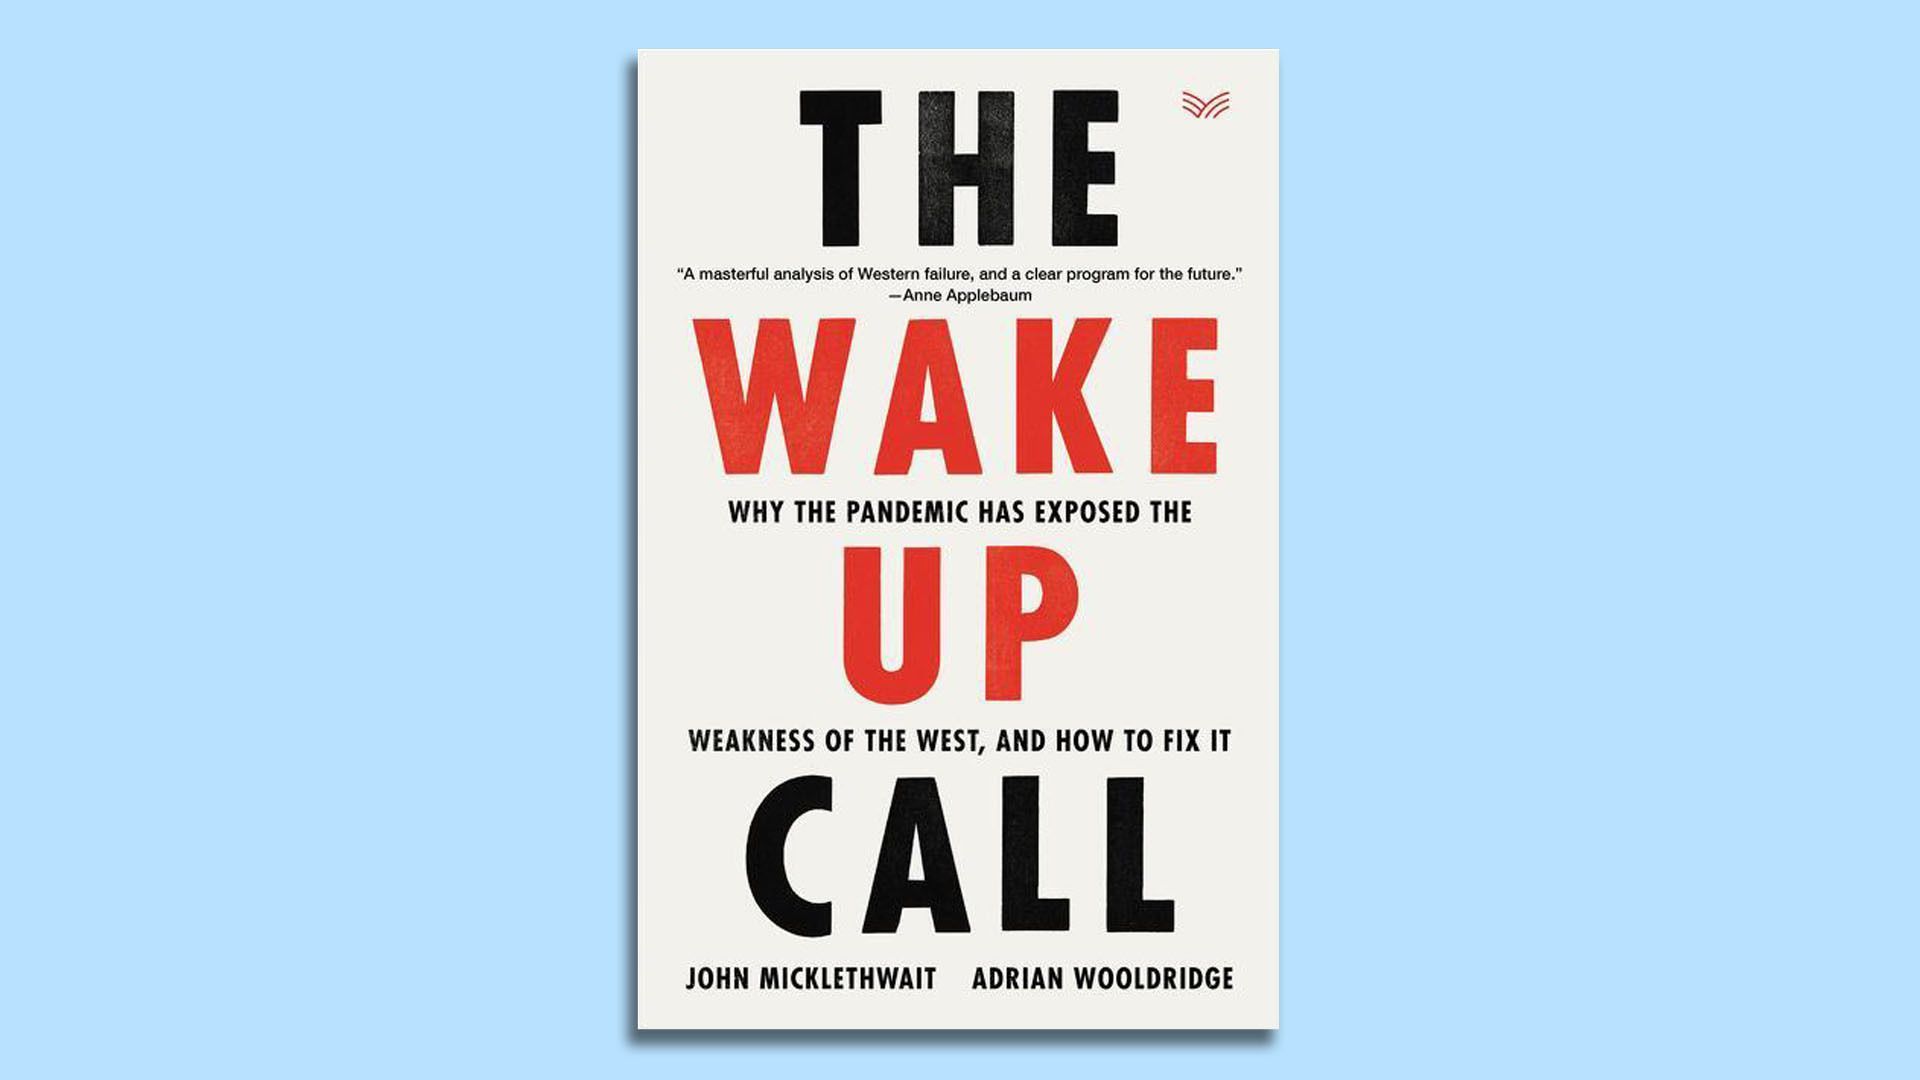 Cover of the book "The Wake Up Call" 